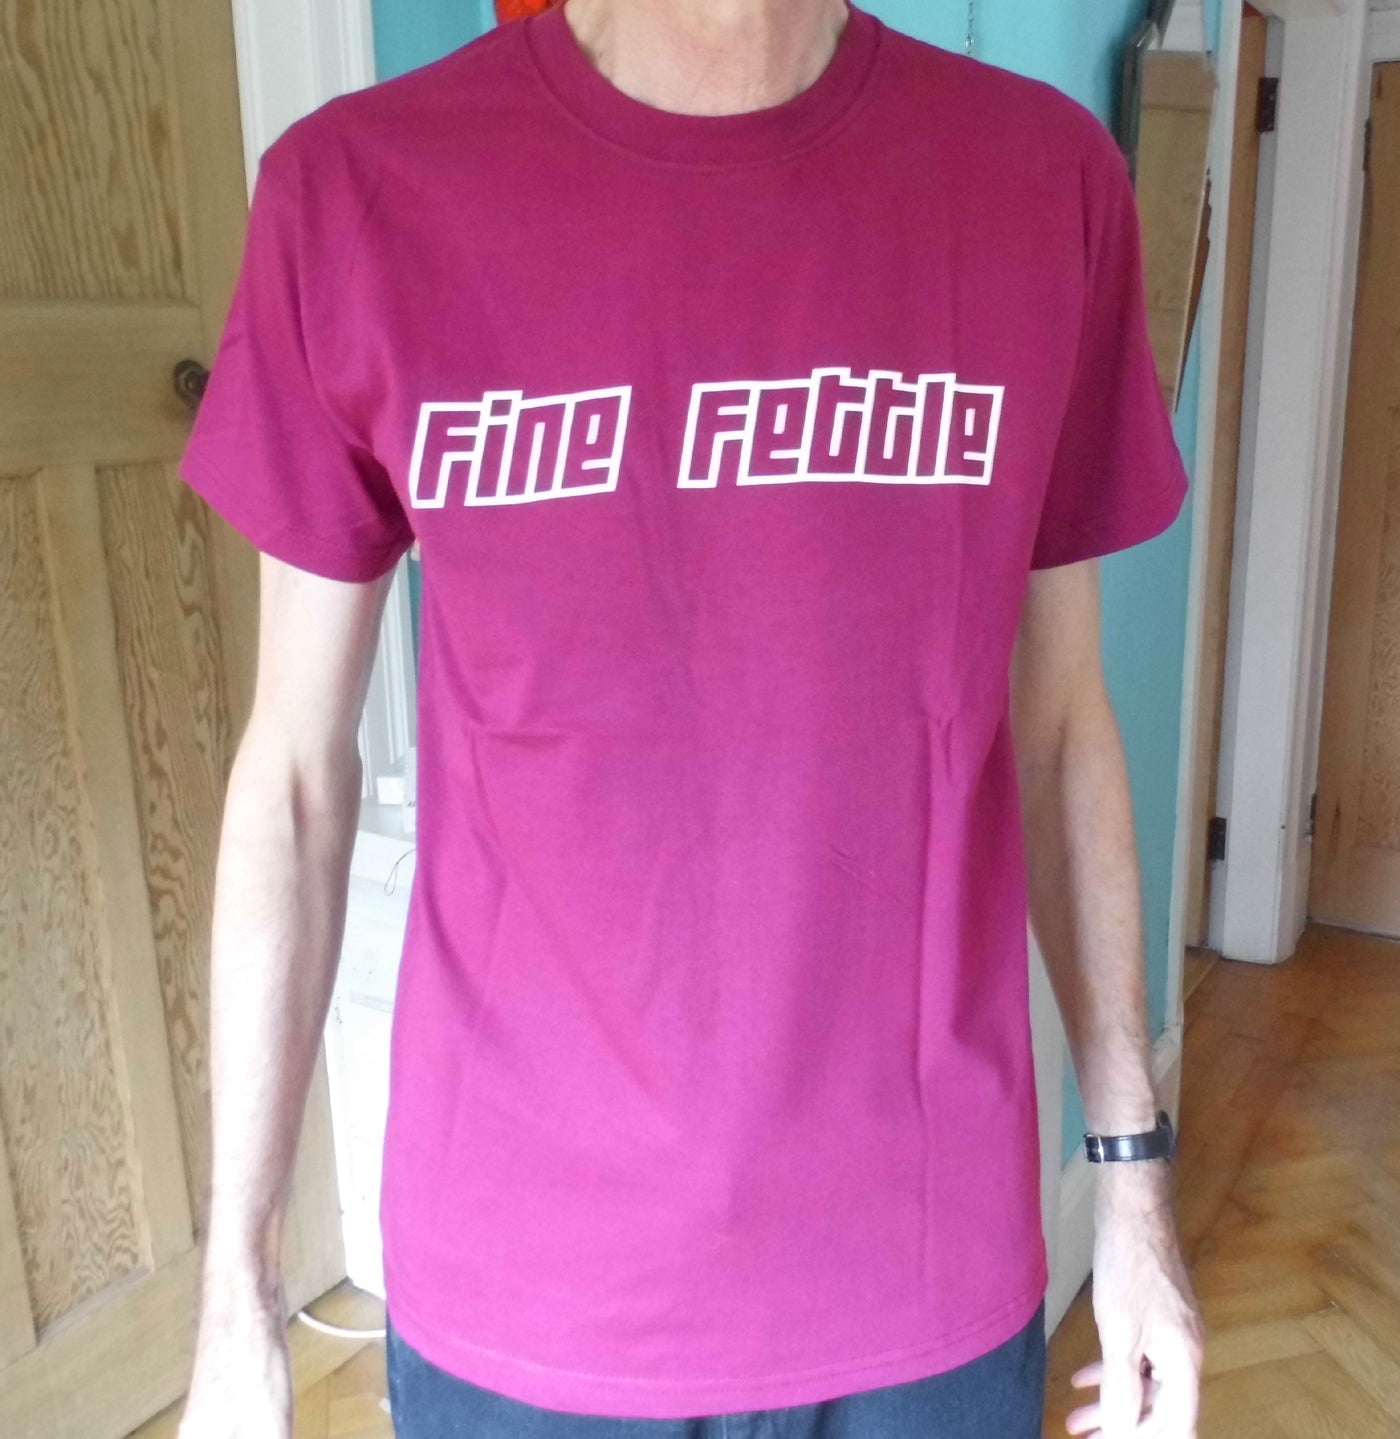 Sale Fine Fettle T-shirts - Small only